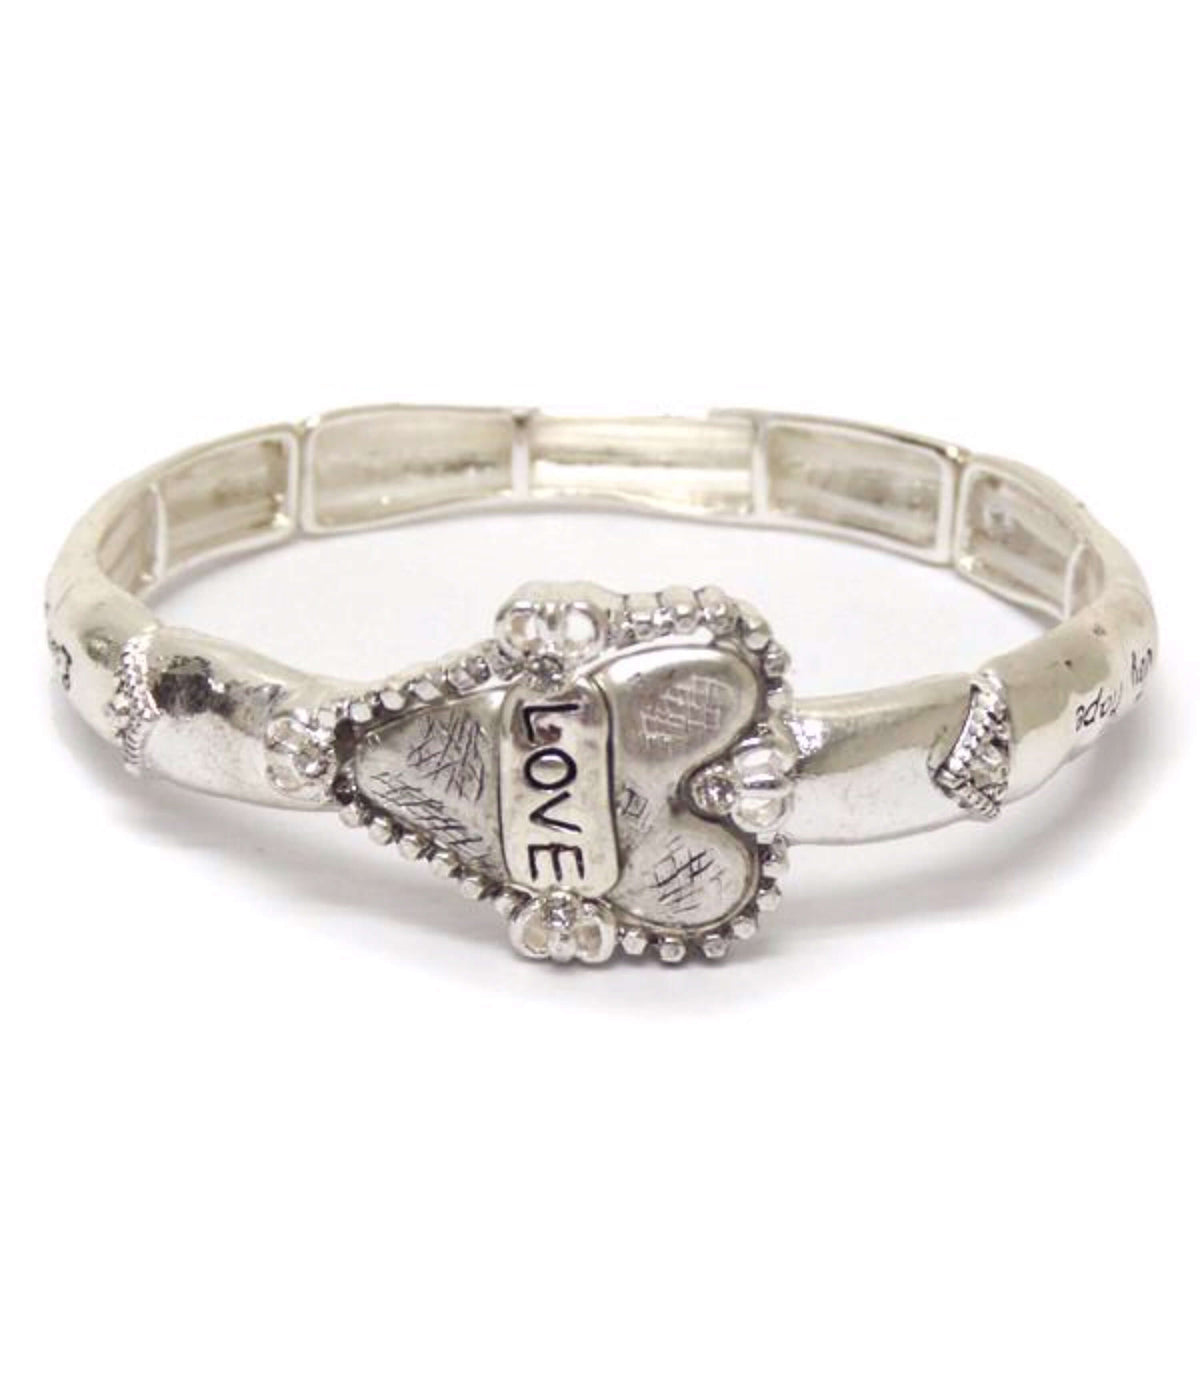 Metal textured heart message bracelet for Valentine's Day - The House of Awareness